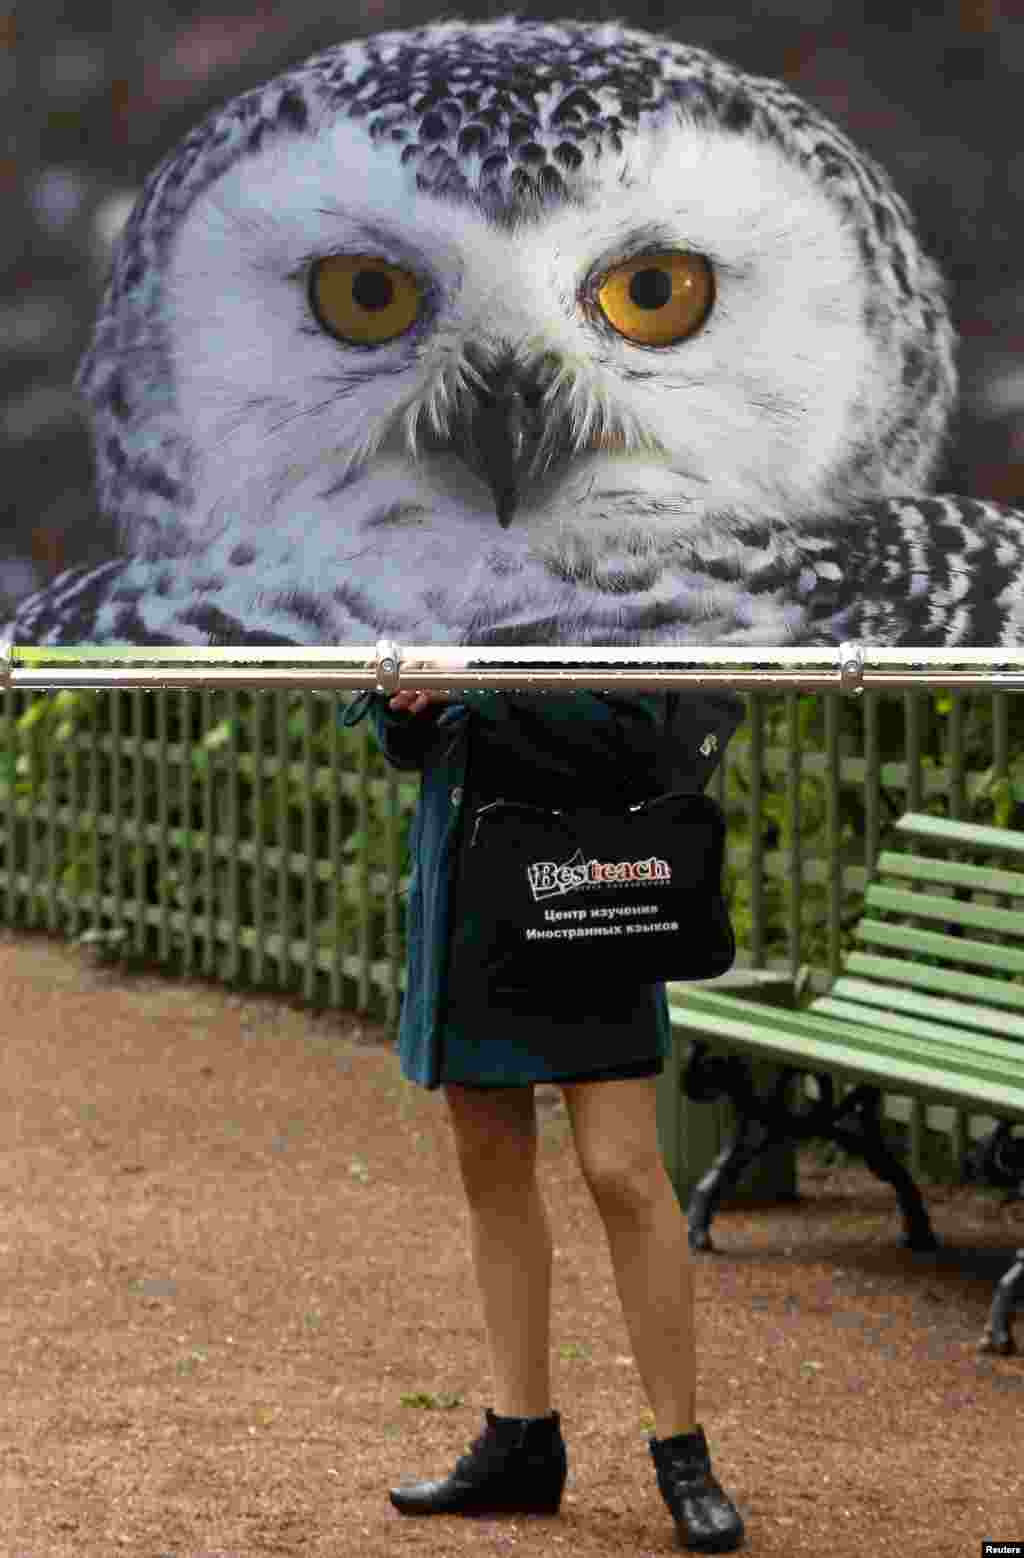 A visitor stands behind an illustration of a Polar owl, part of an exhibition at the Summer Garden, in St. Petersburg, Russia.